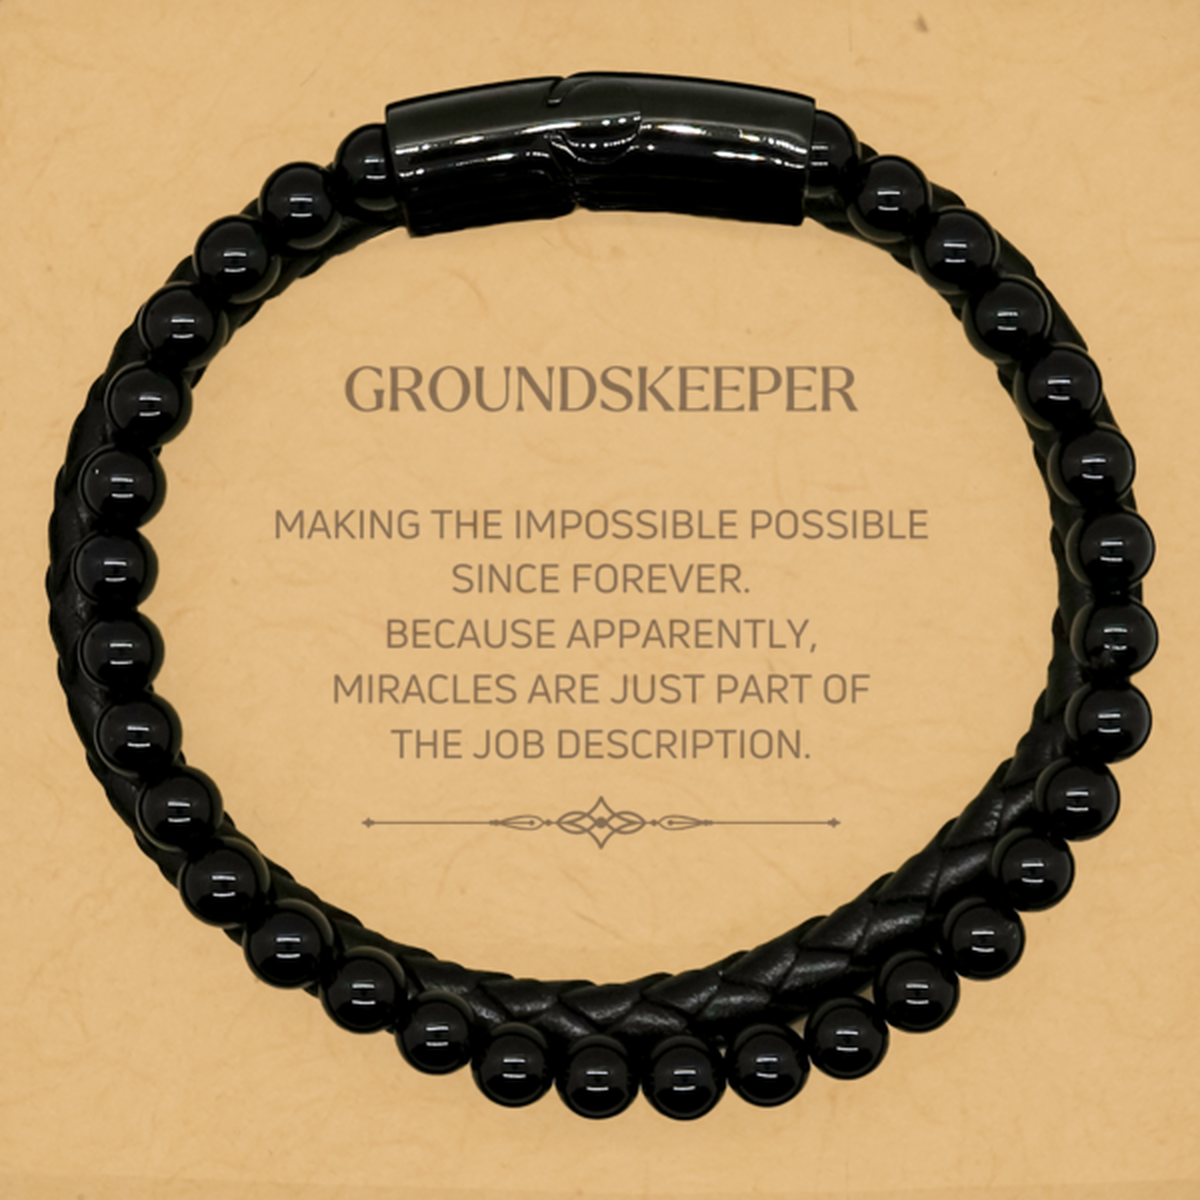 Funny Groundskeeper Gifts, Miracles are just part of the job description, Inspirational Birthday Stone Leather Bracelets For Groundskeeper, Men, Women, Coworkers, Friends, Boss